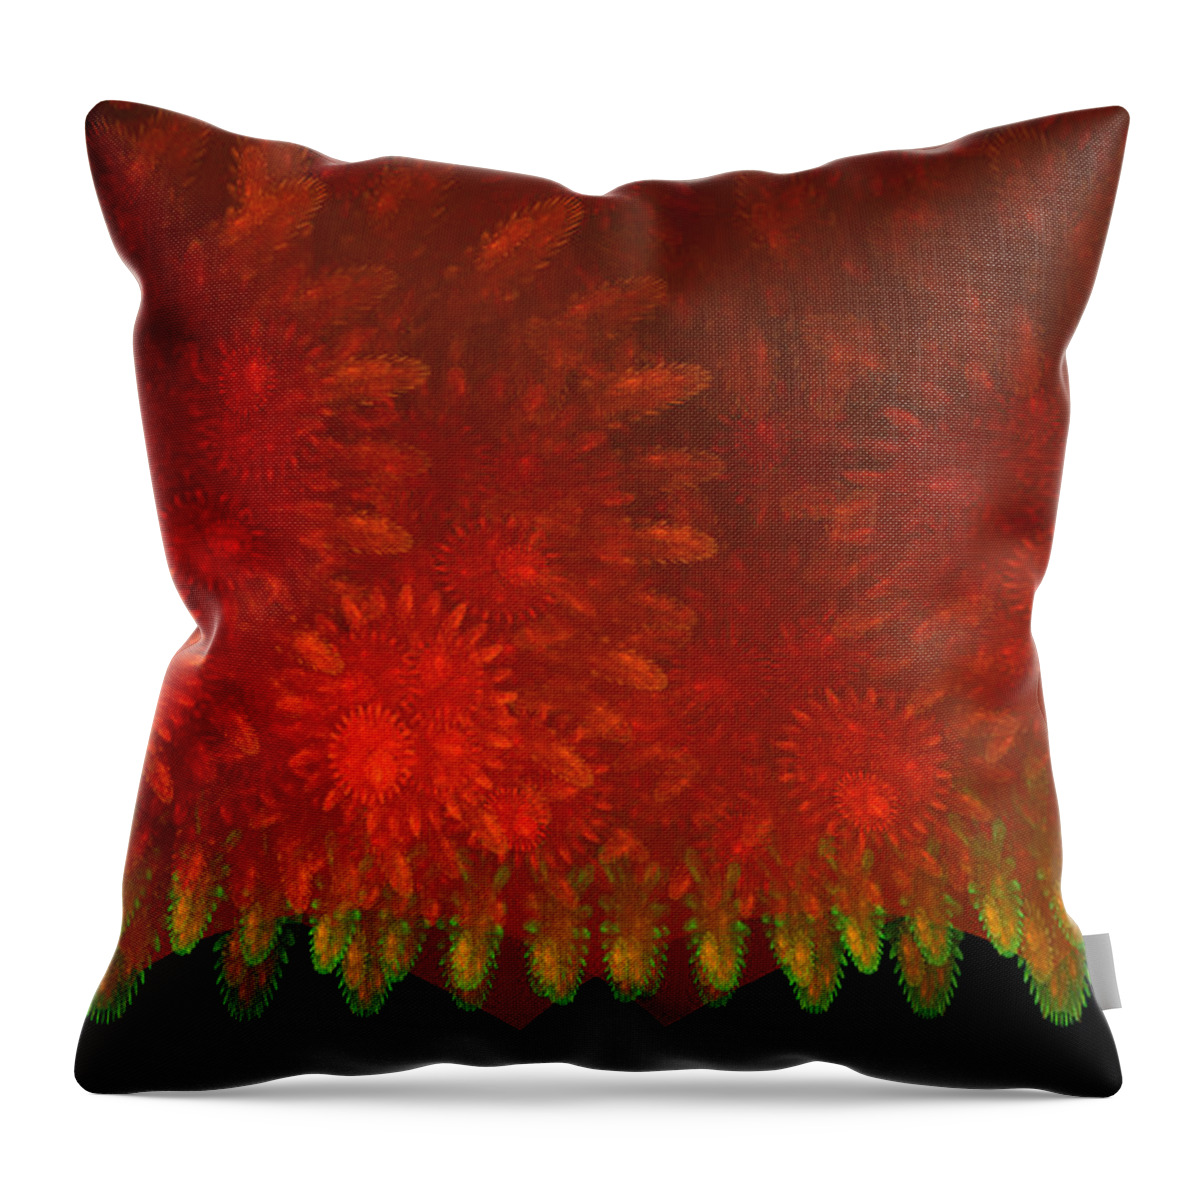 Abstracts Throw Pillow featuring the digital art 1274 by Lar Matre